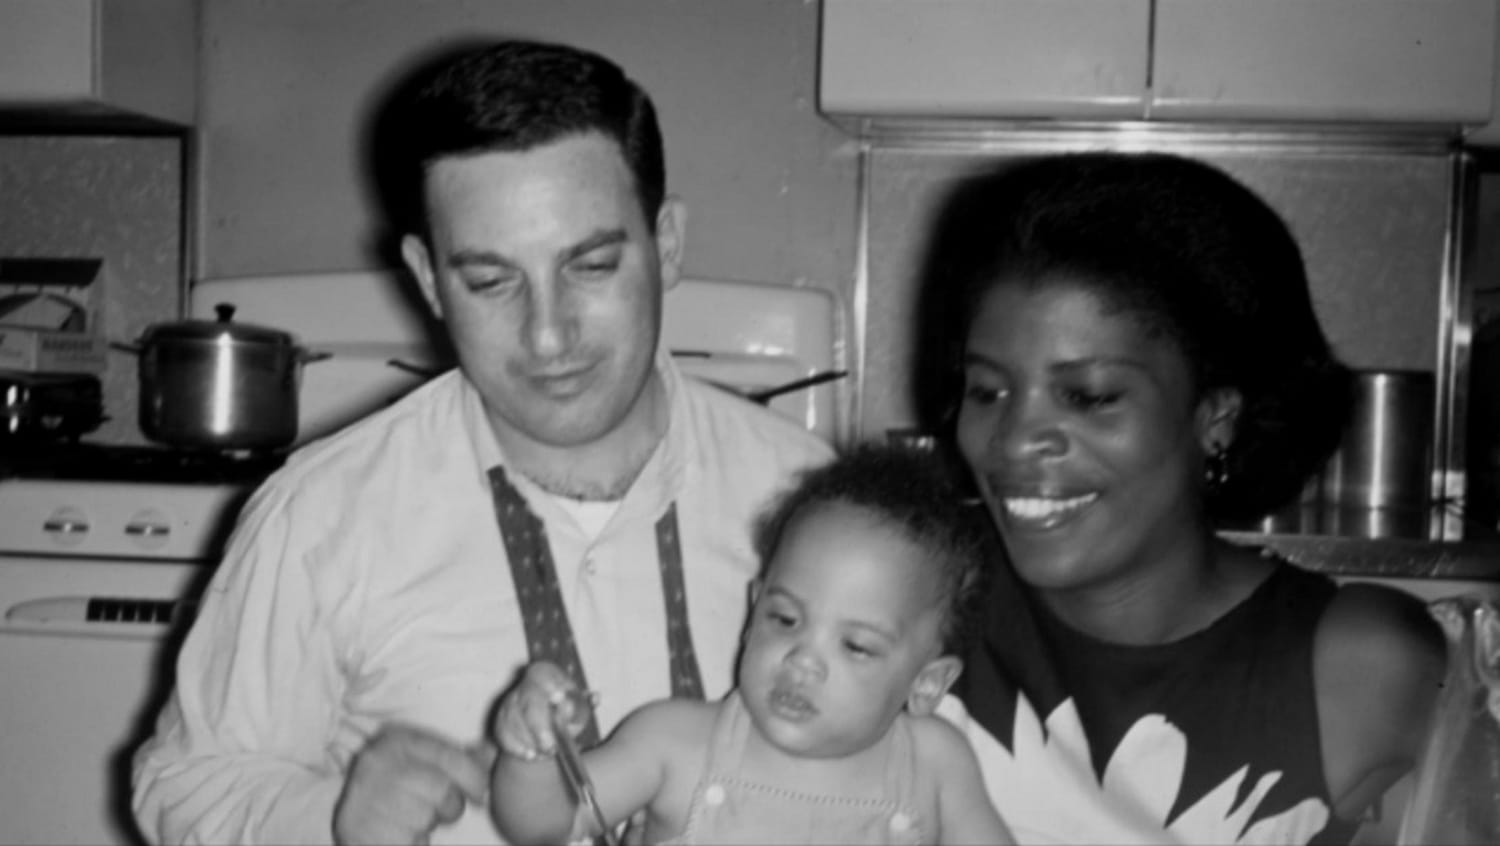 One year old Lenny Kravitz, with his parents Sy Kravitz and Roxie Roker. New York, 1965.